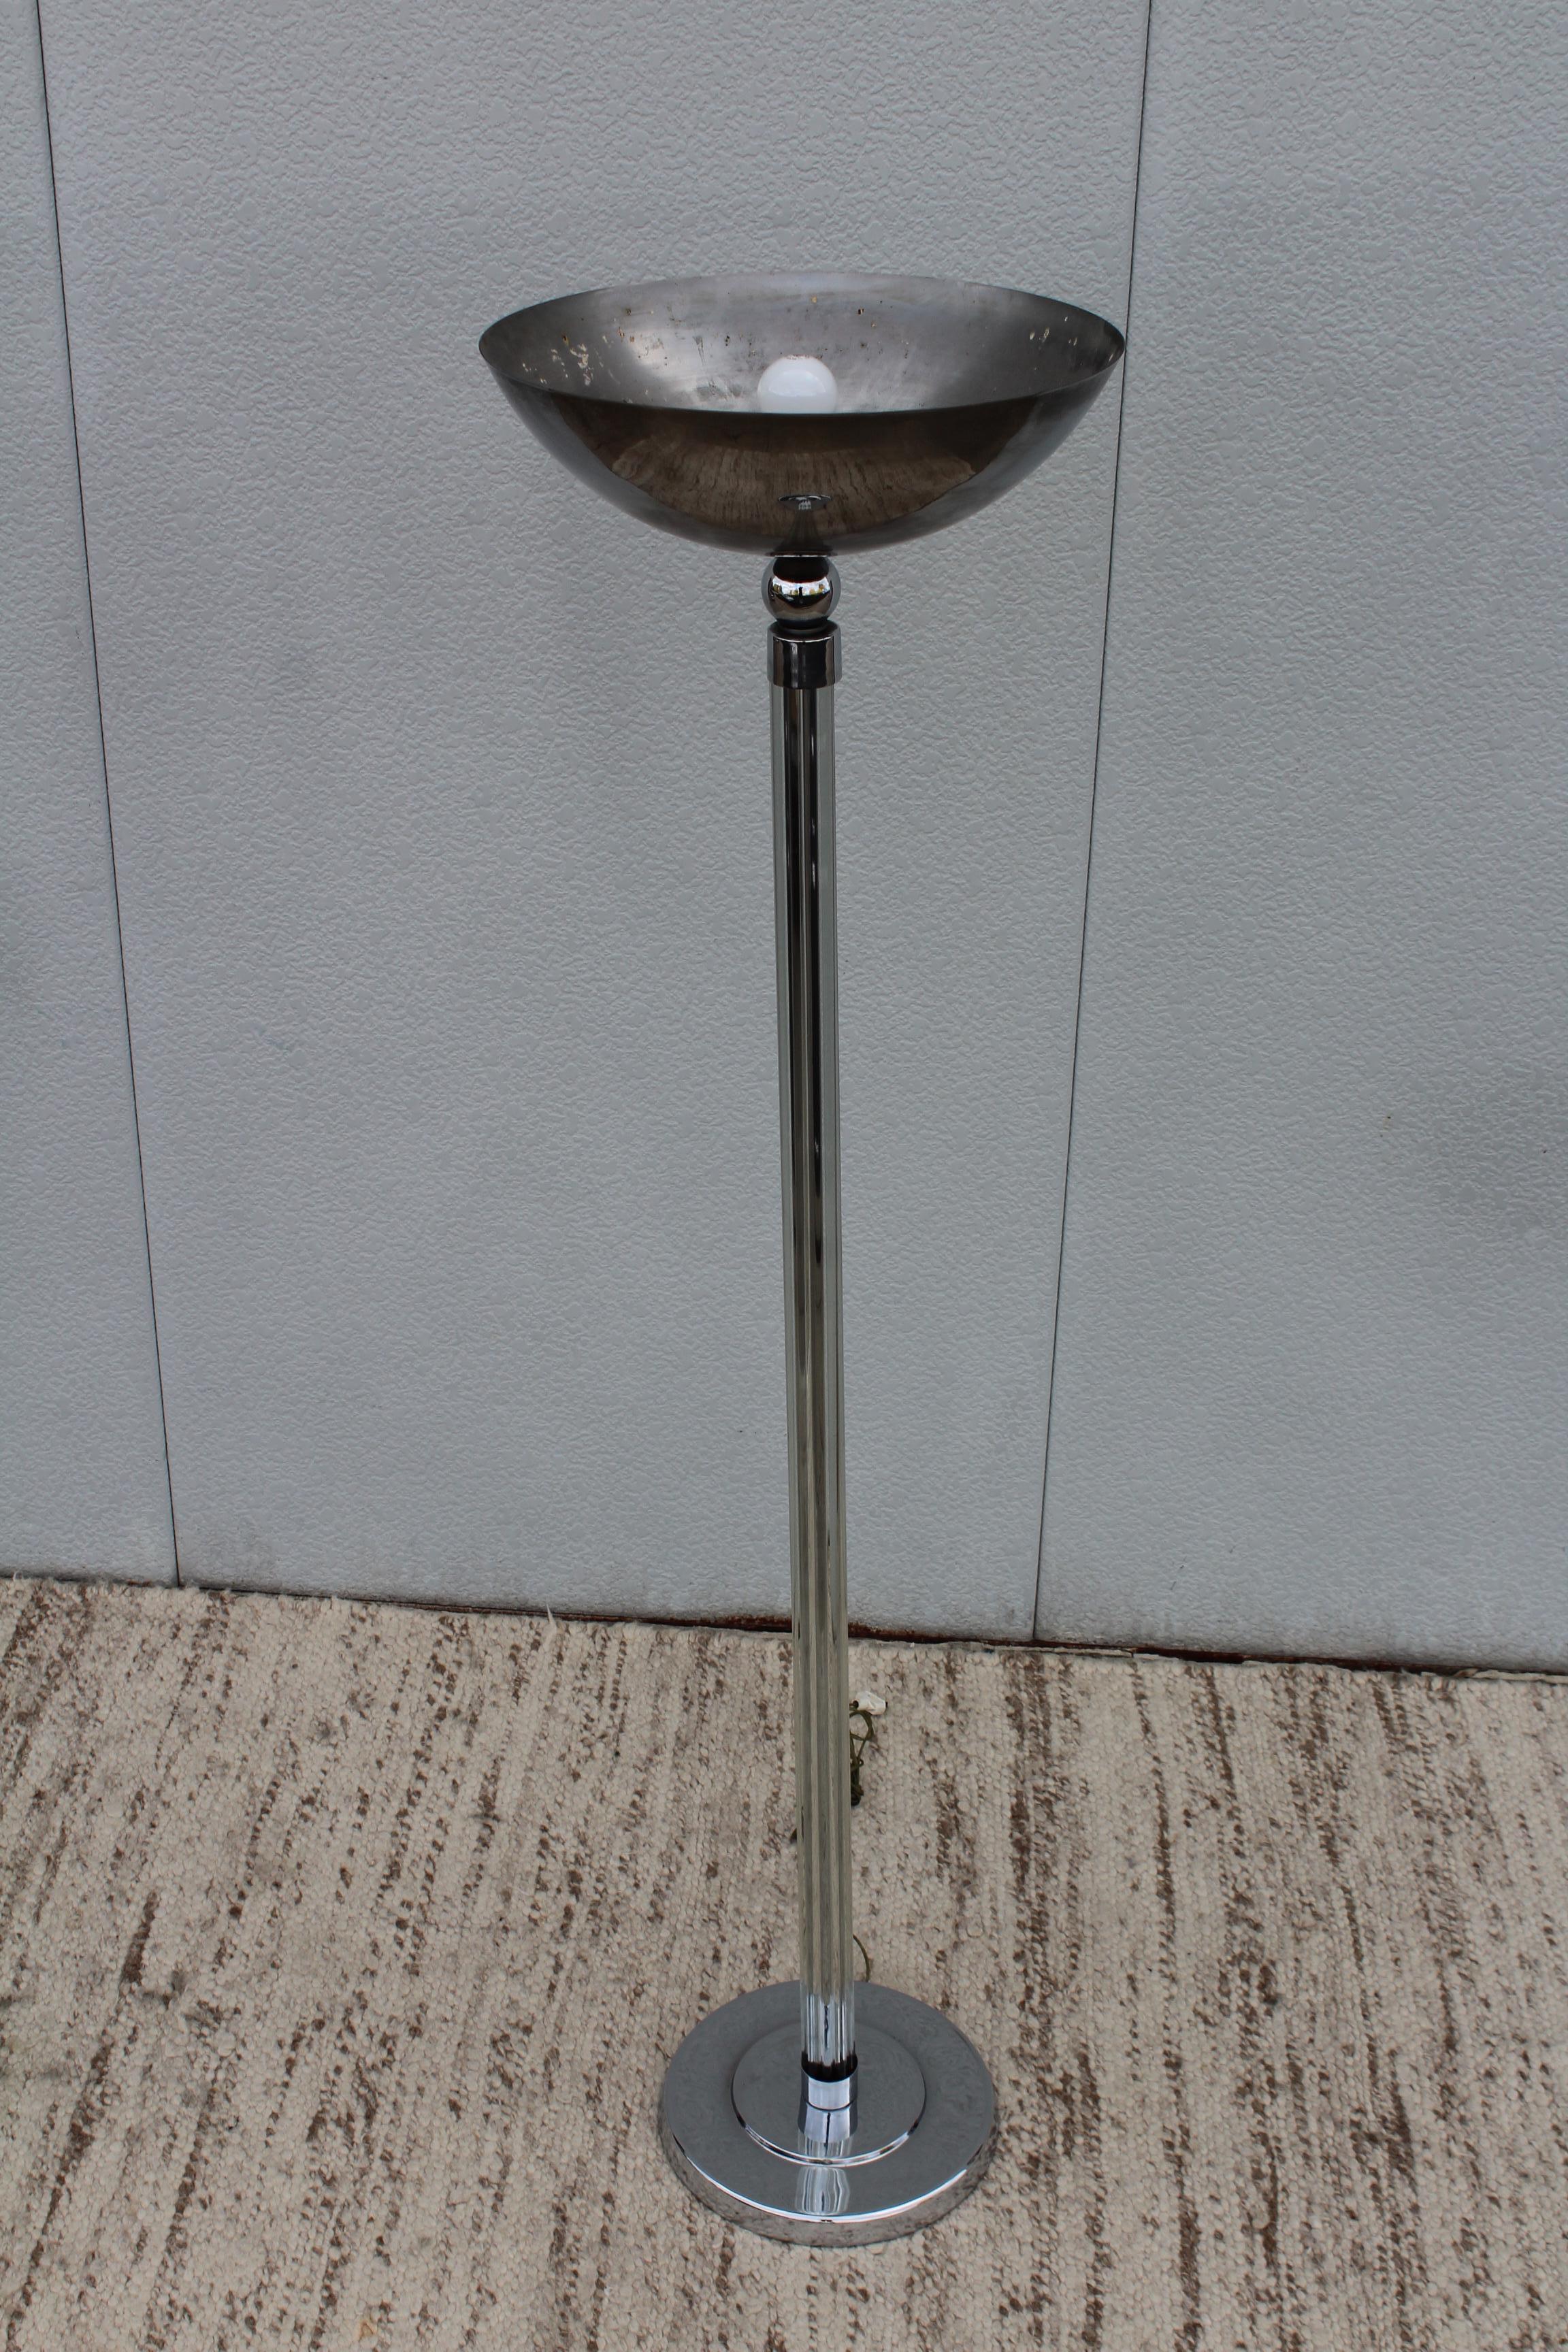 1970s Karl Springer style chrome with glass rods floor lamp. In vintage original condition with some wear and patina.